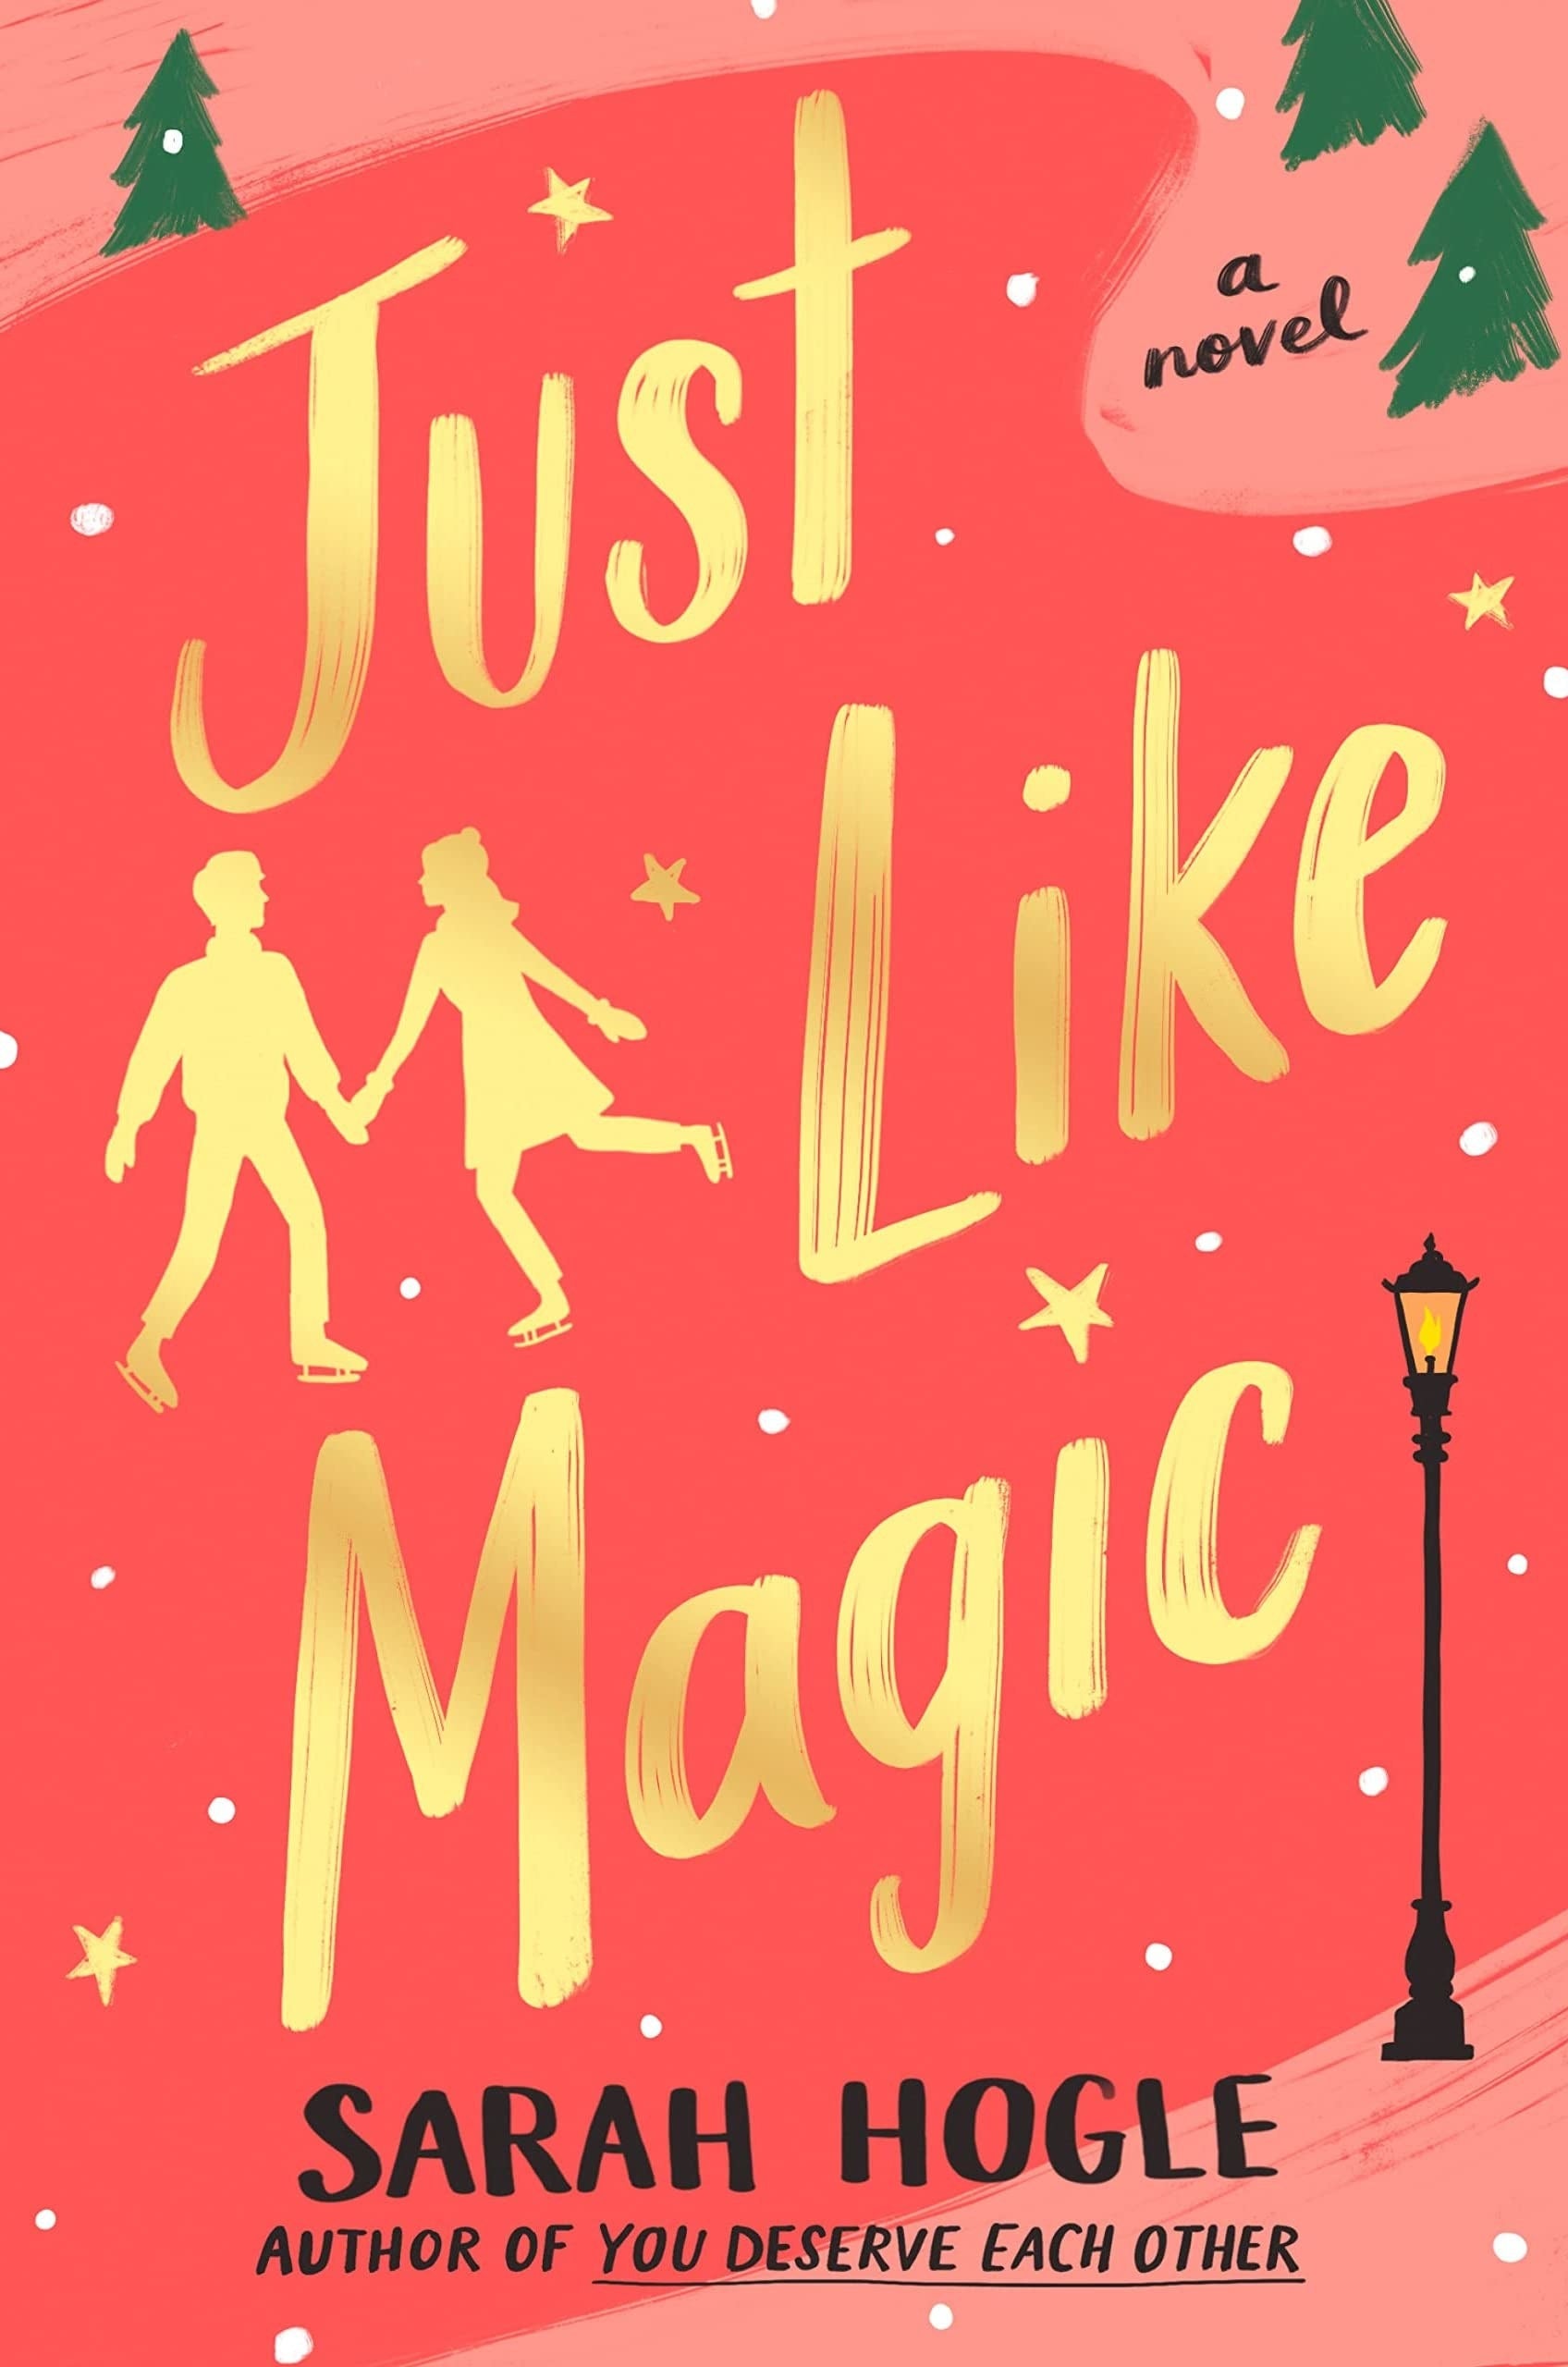 Just Like Magic book cover. Book by Sarah Hogle.